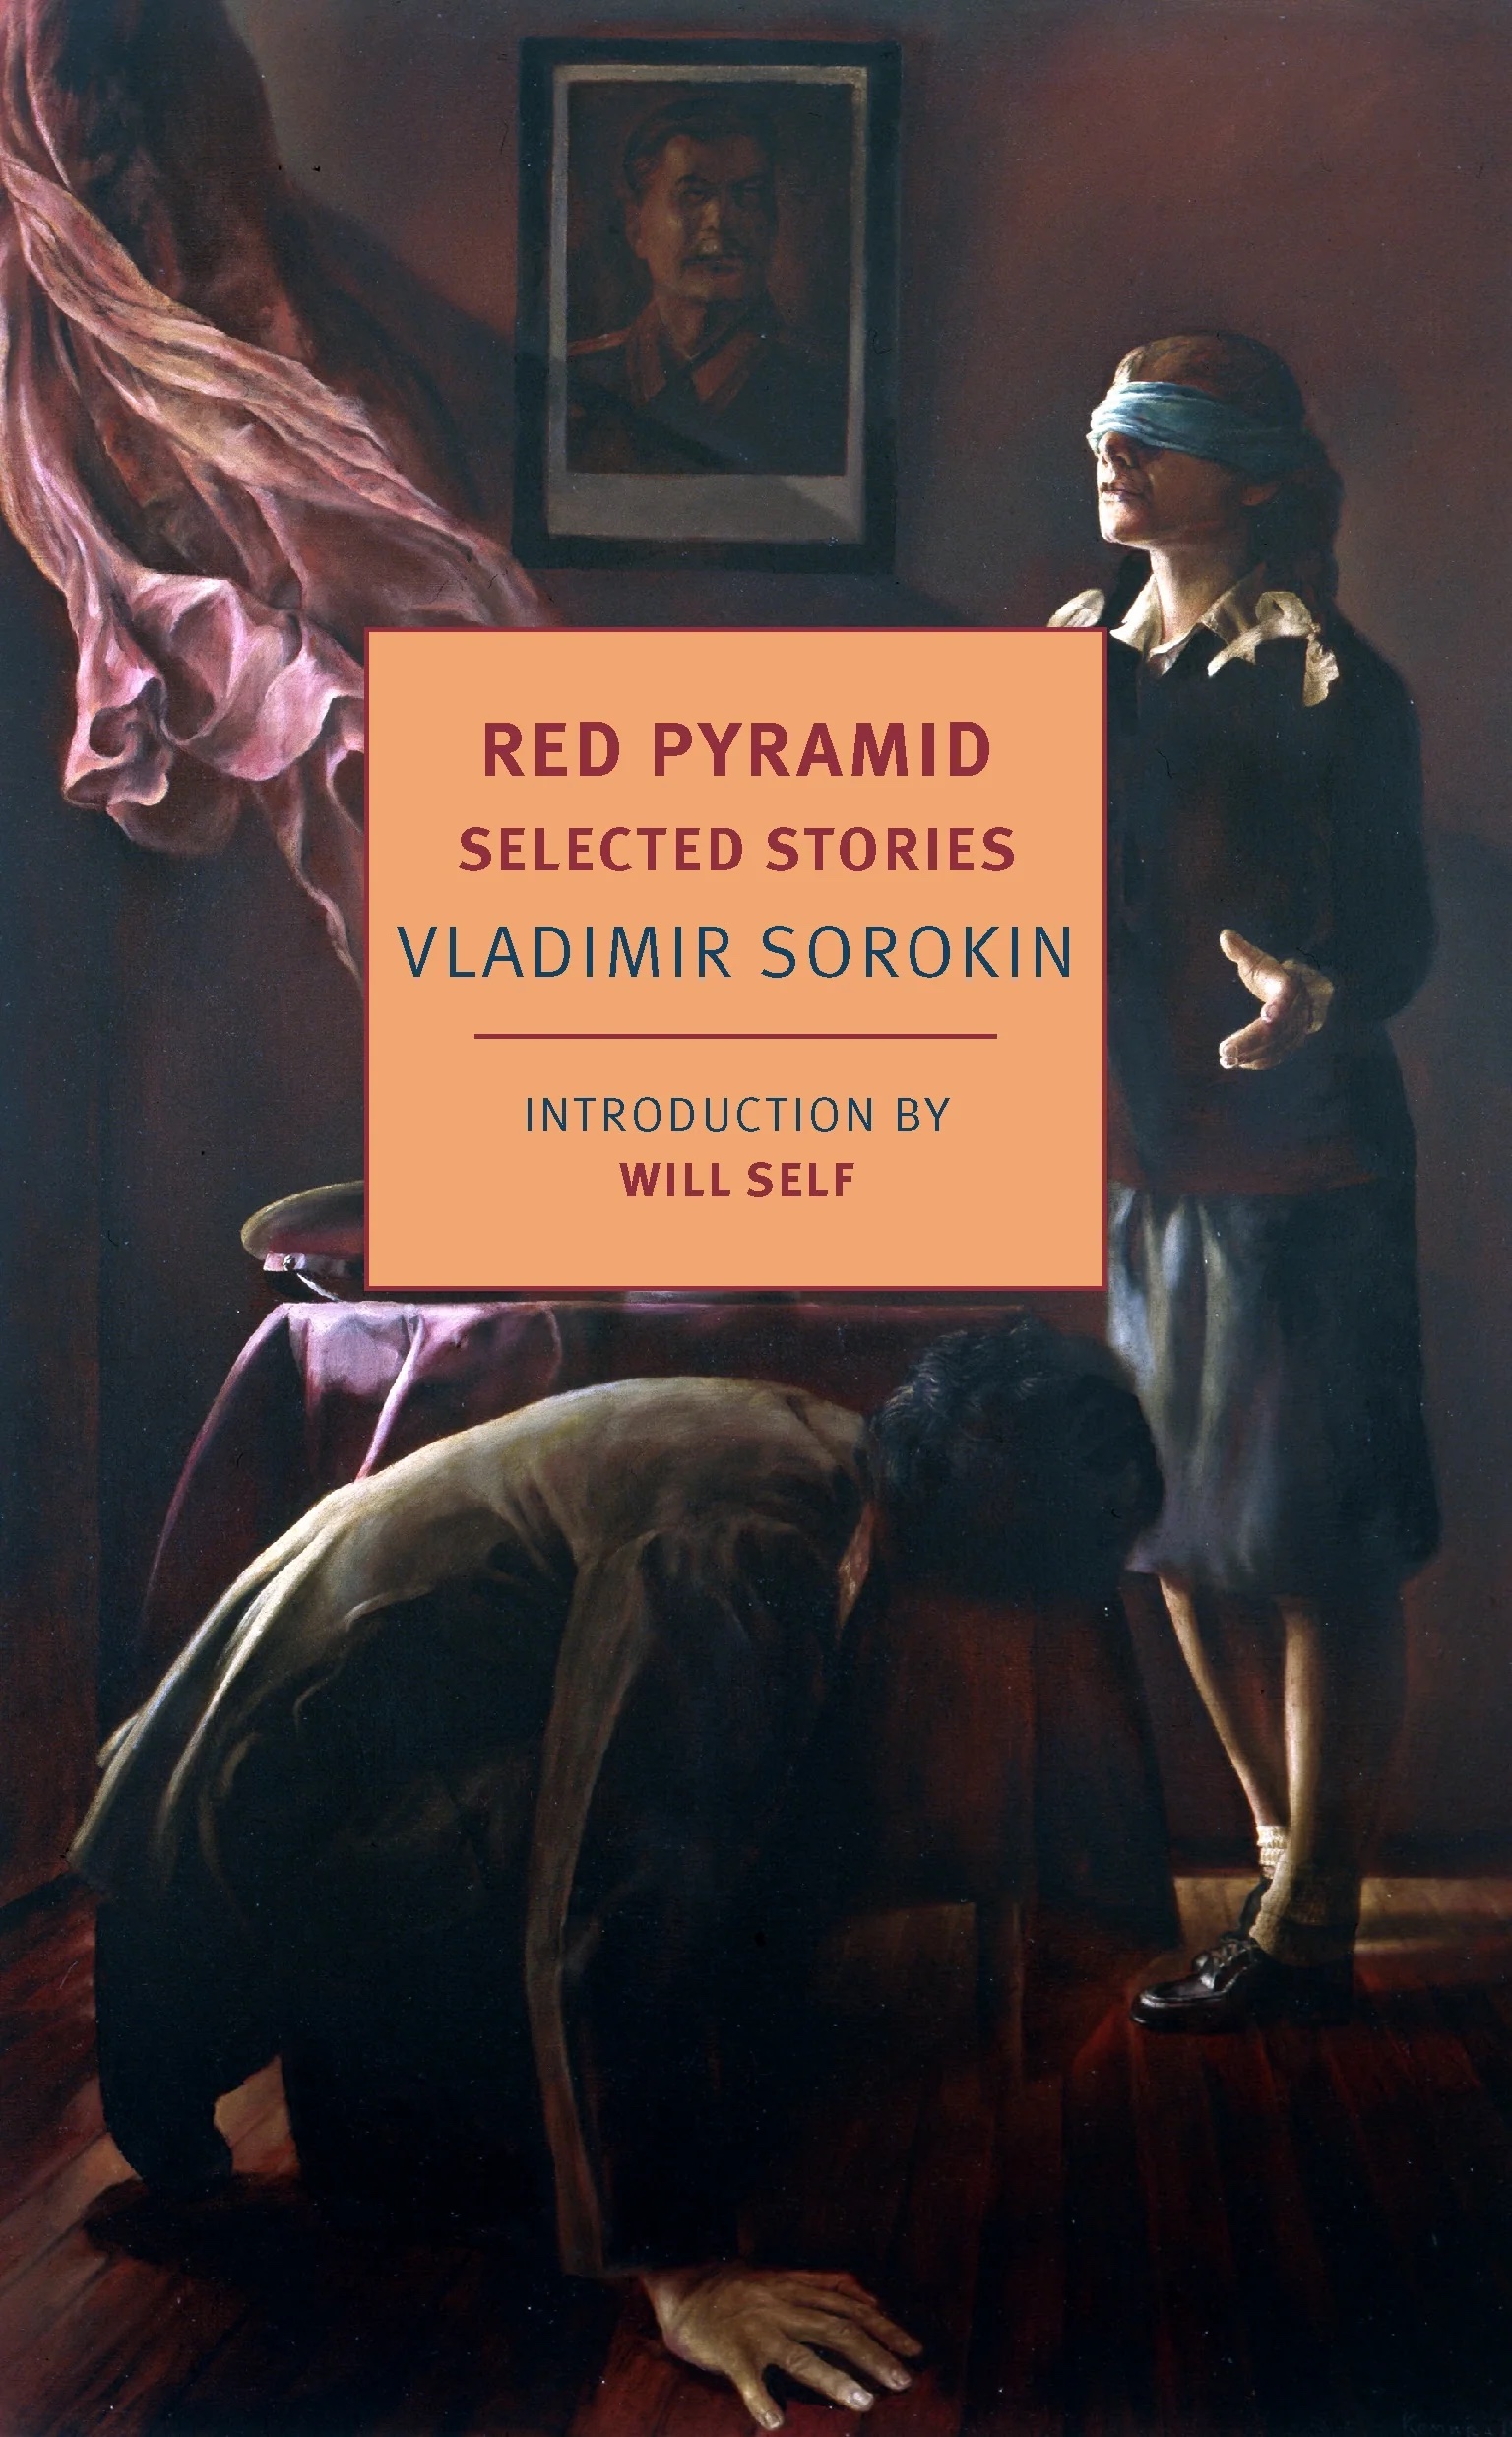 The cover of Red Pyramid: Selected Stories